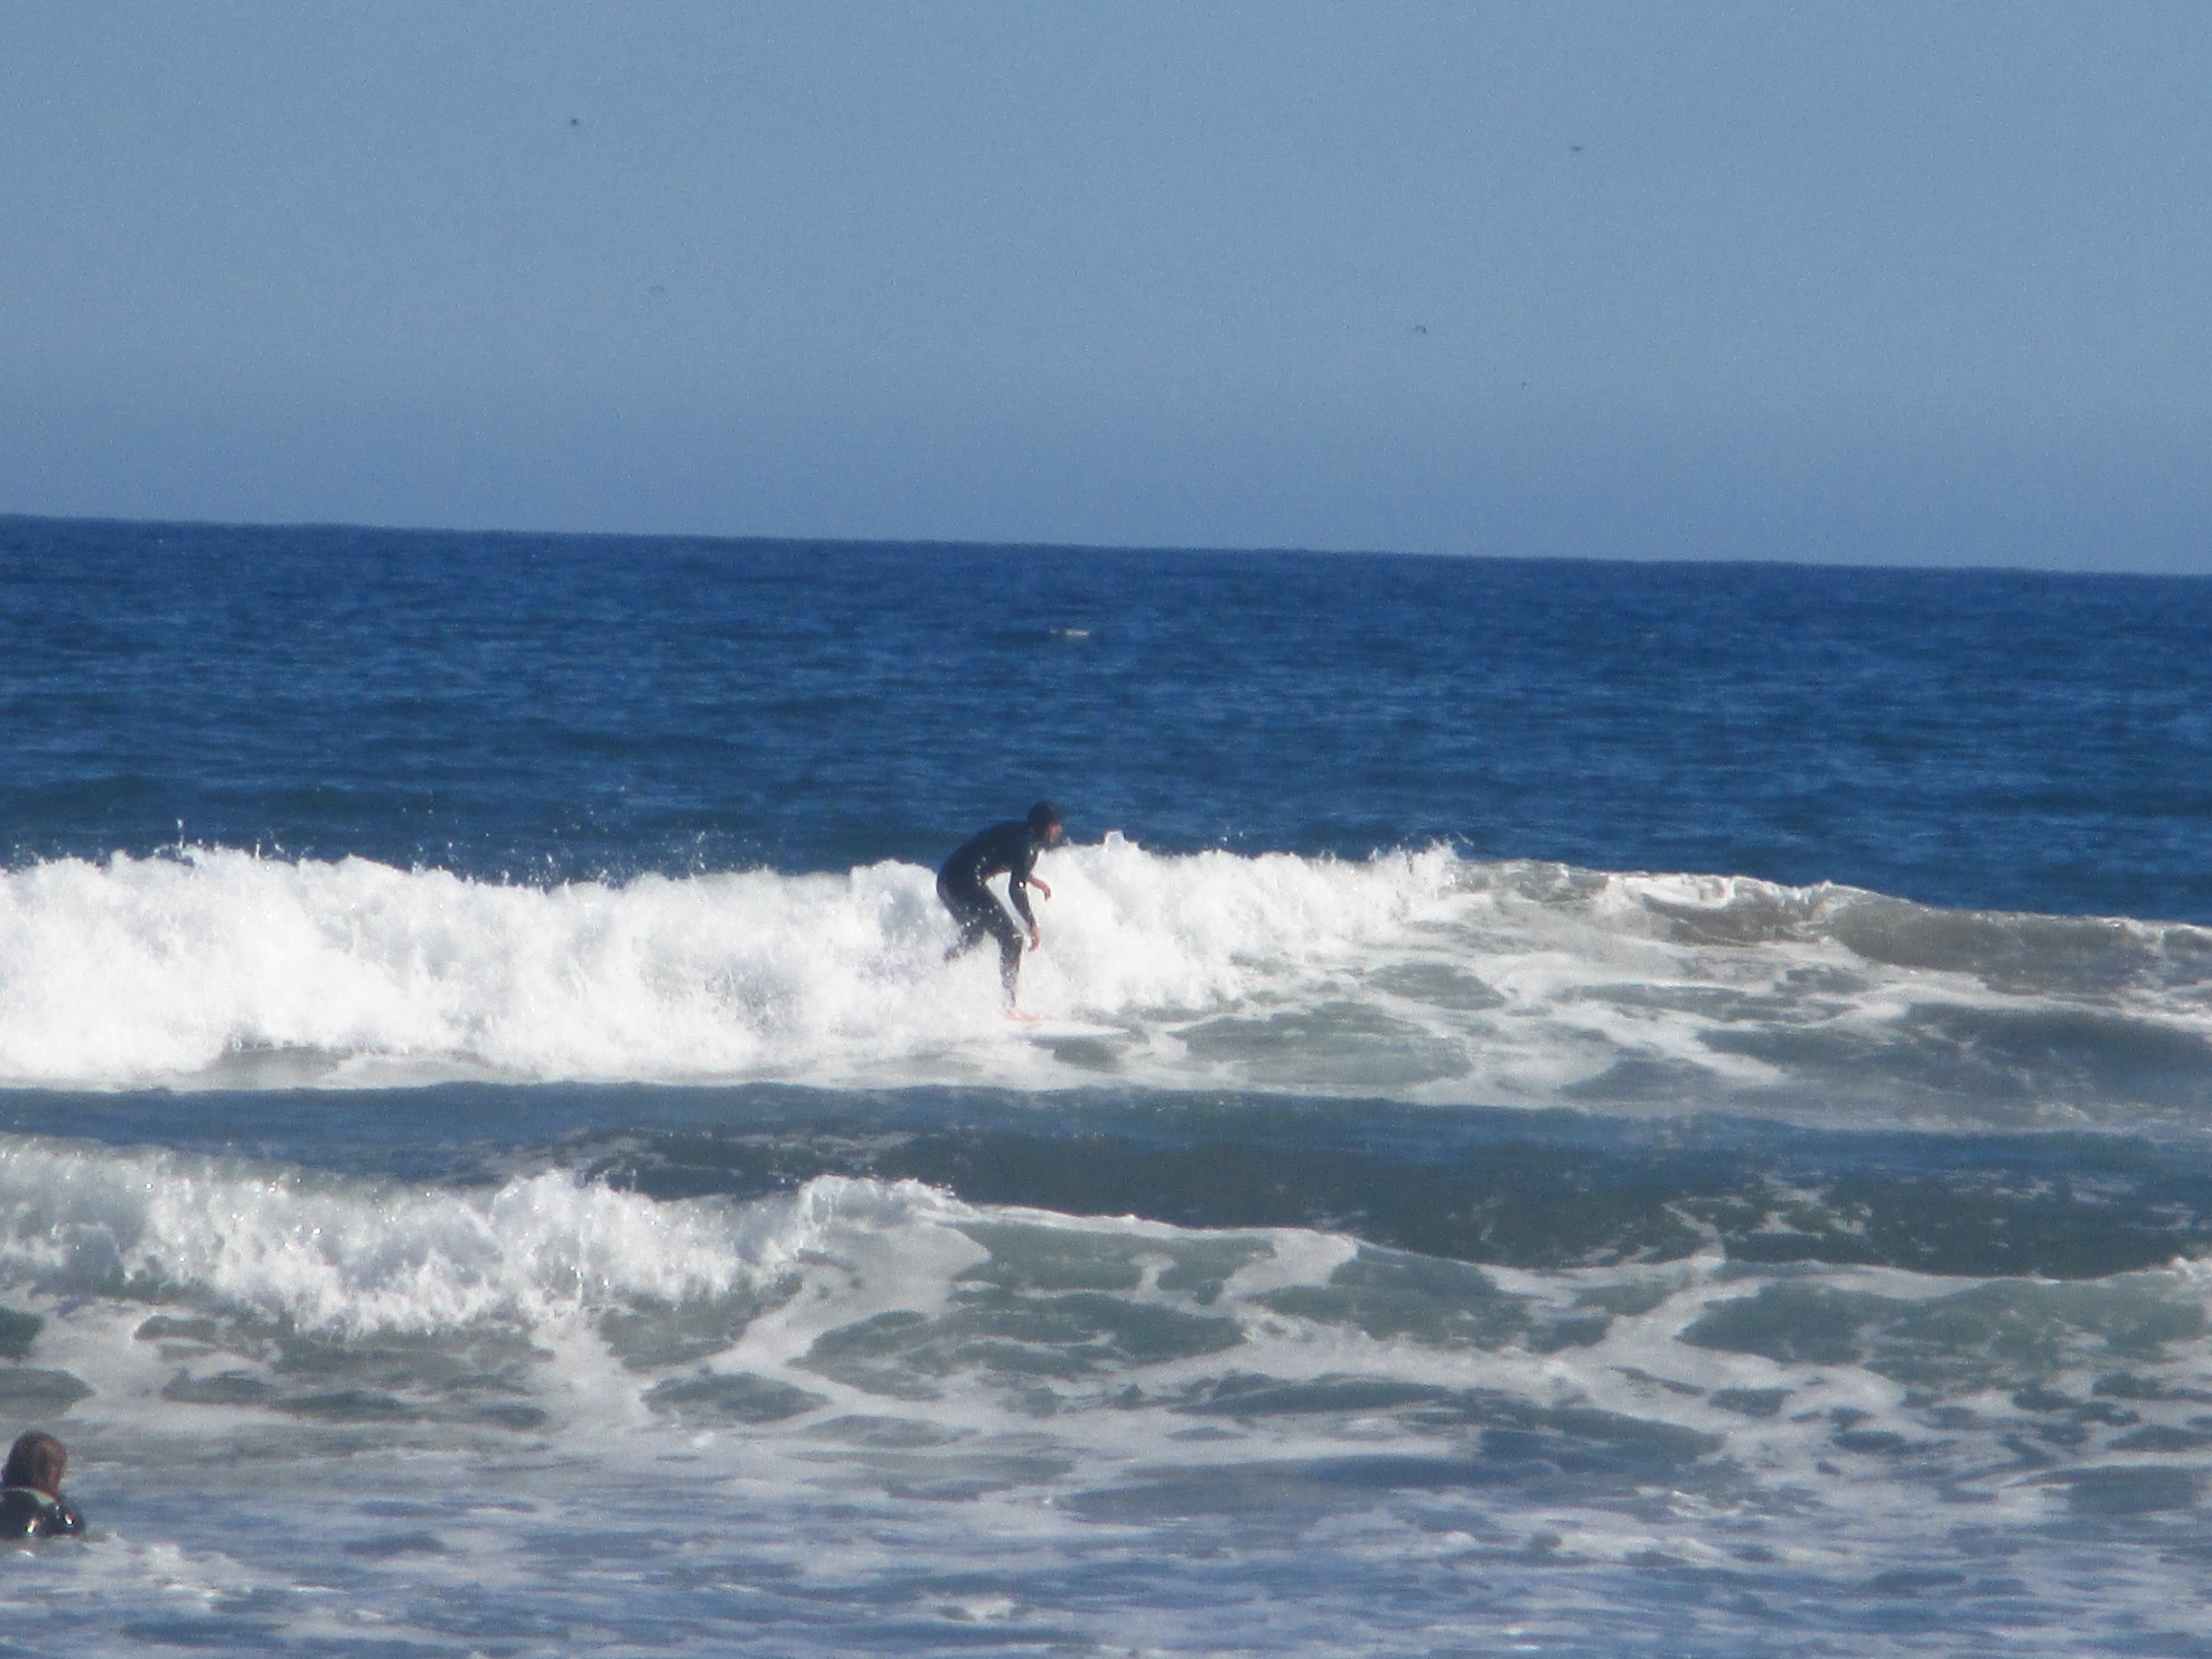 Surfers riding the waves in front of the beach in La Serena, Chile